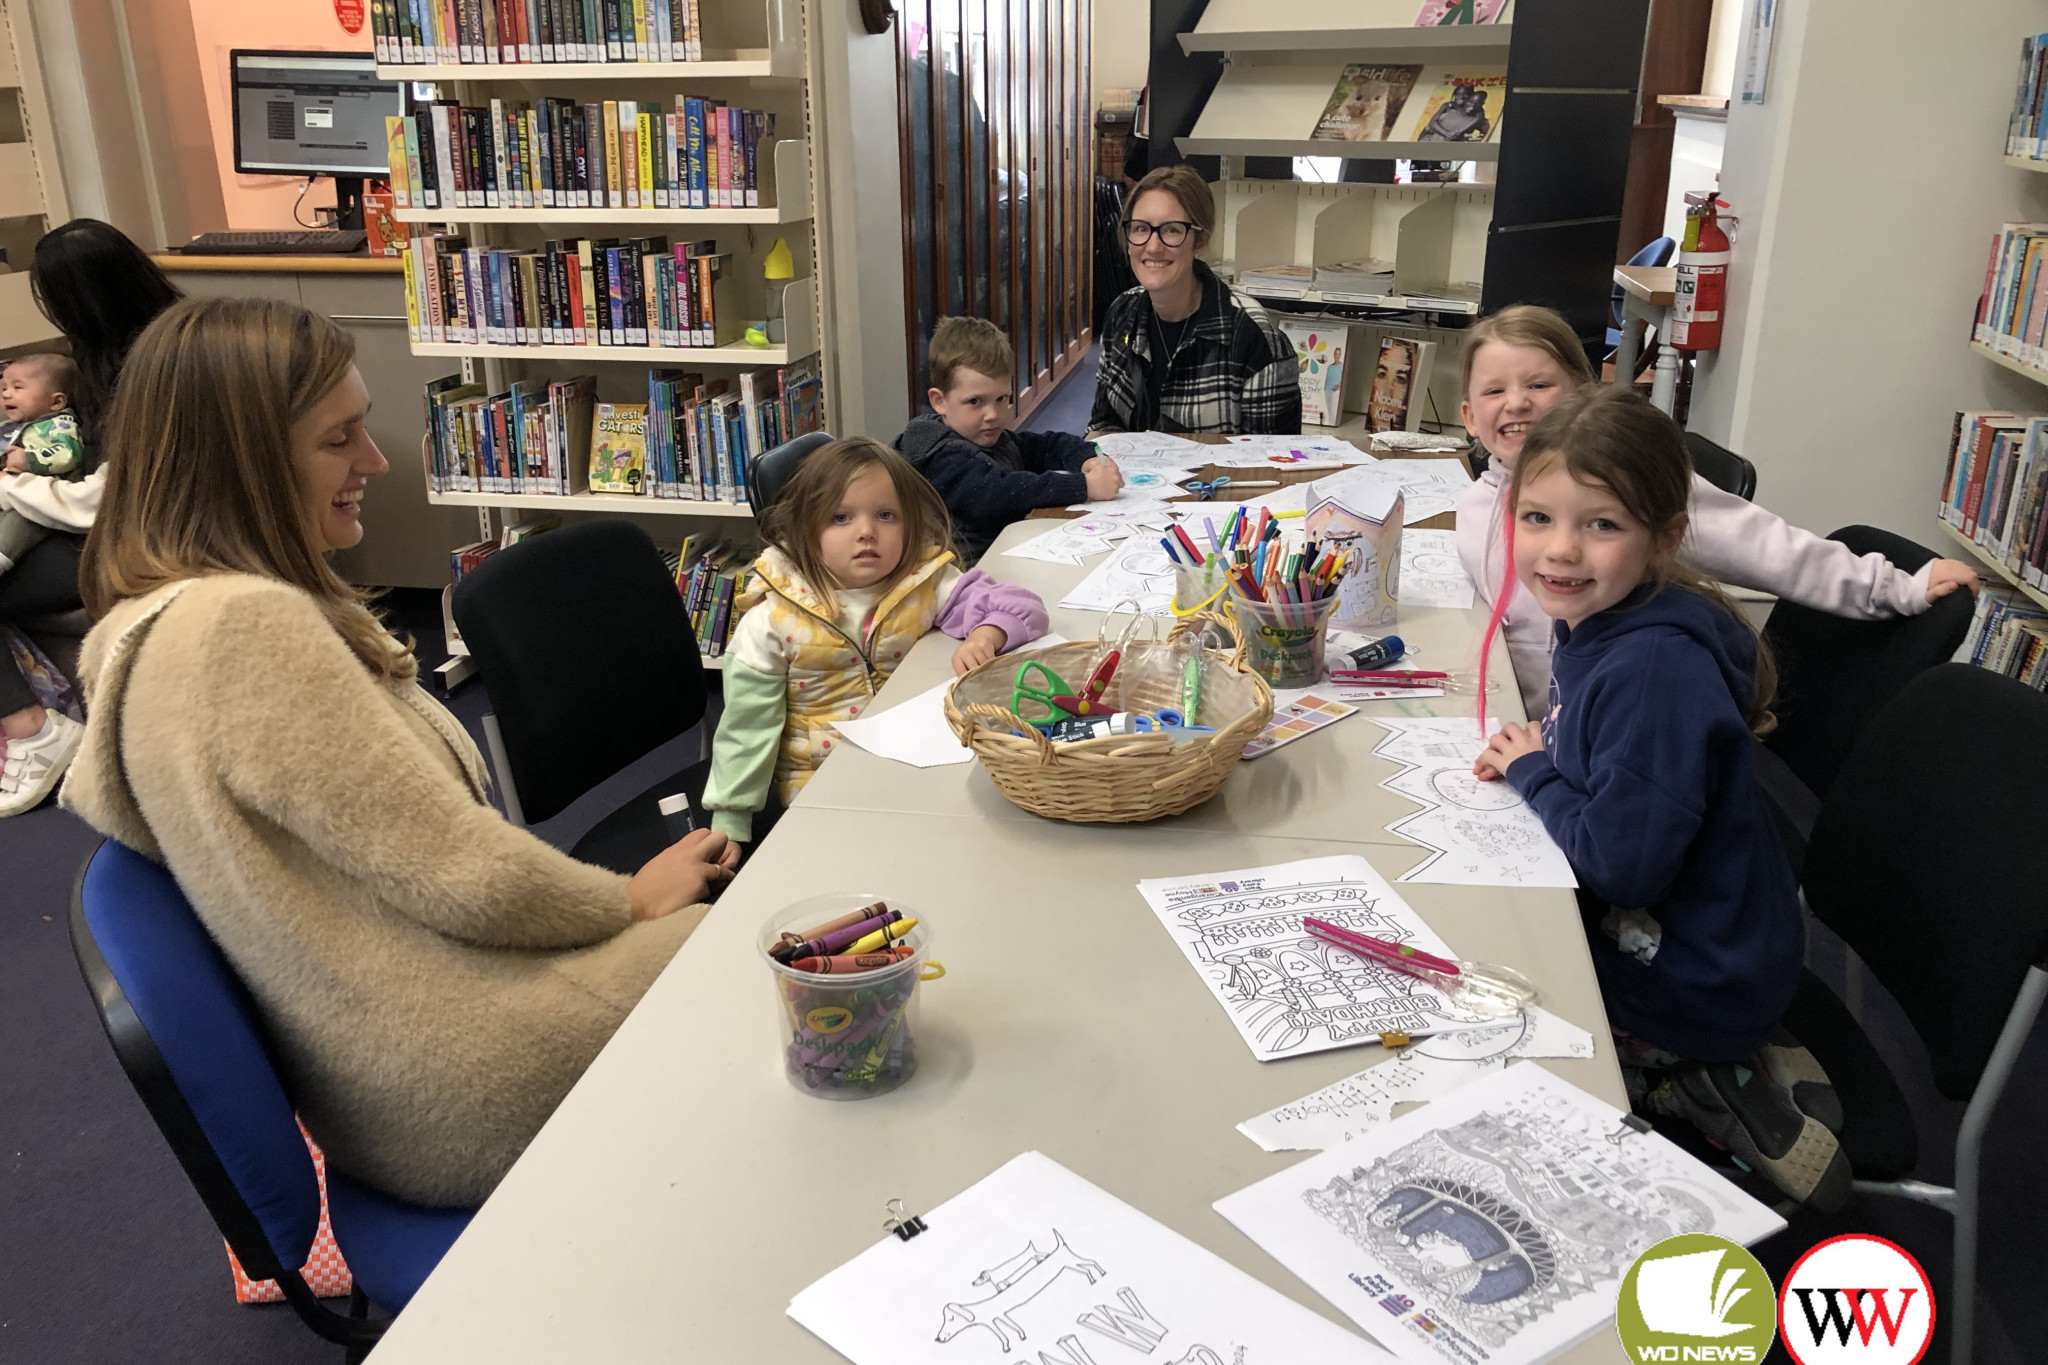 Children also enjoyed some fun activities during their visit to the Port Fairy library on the weekend.